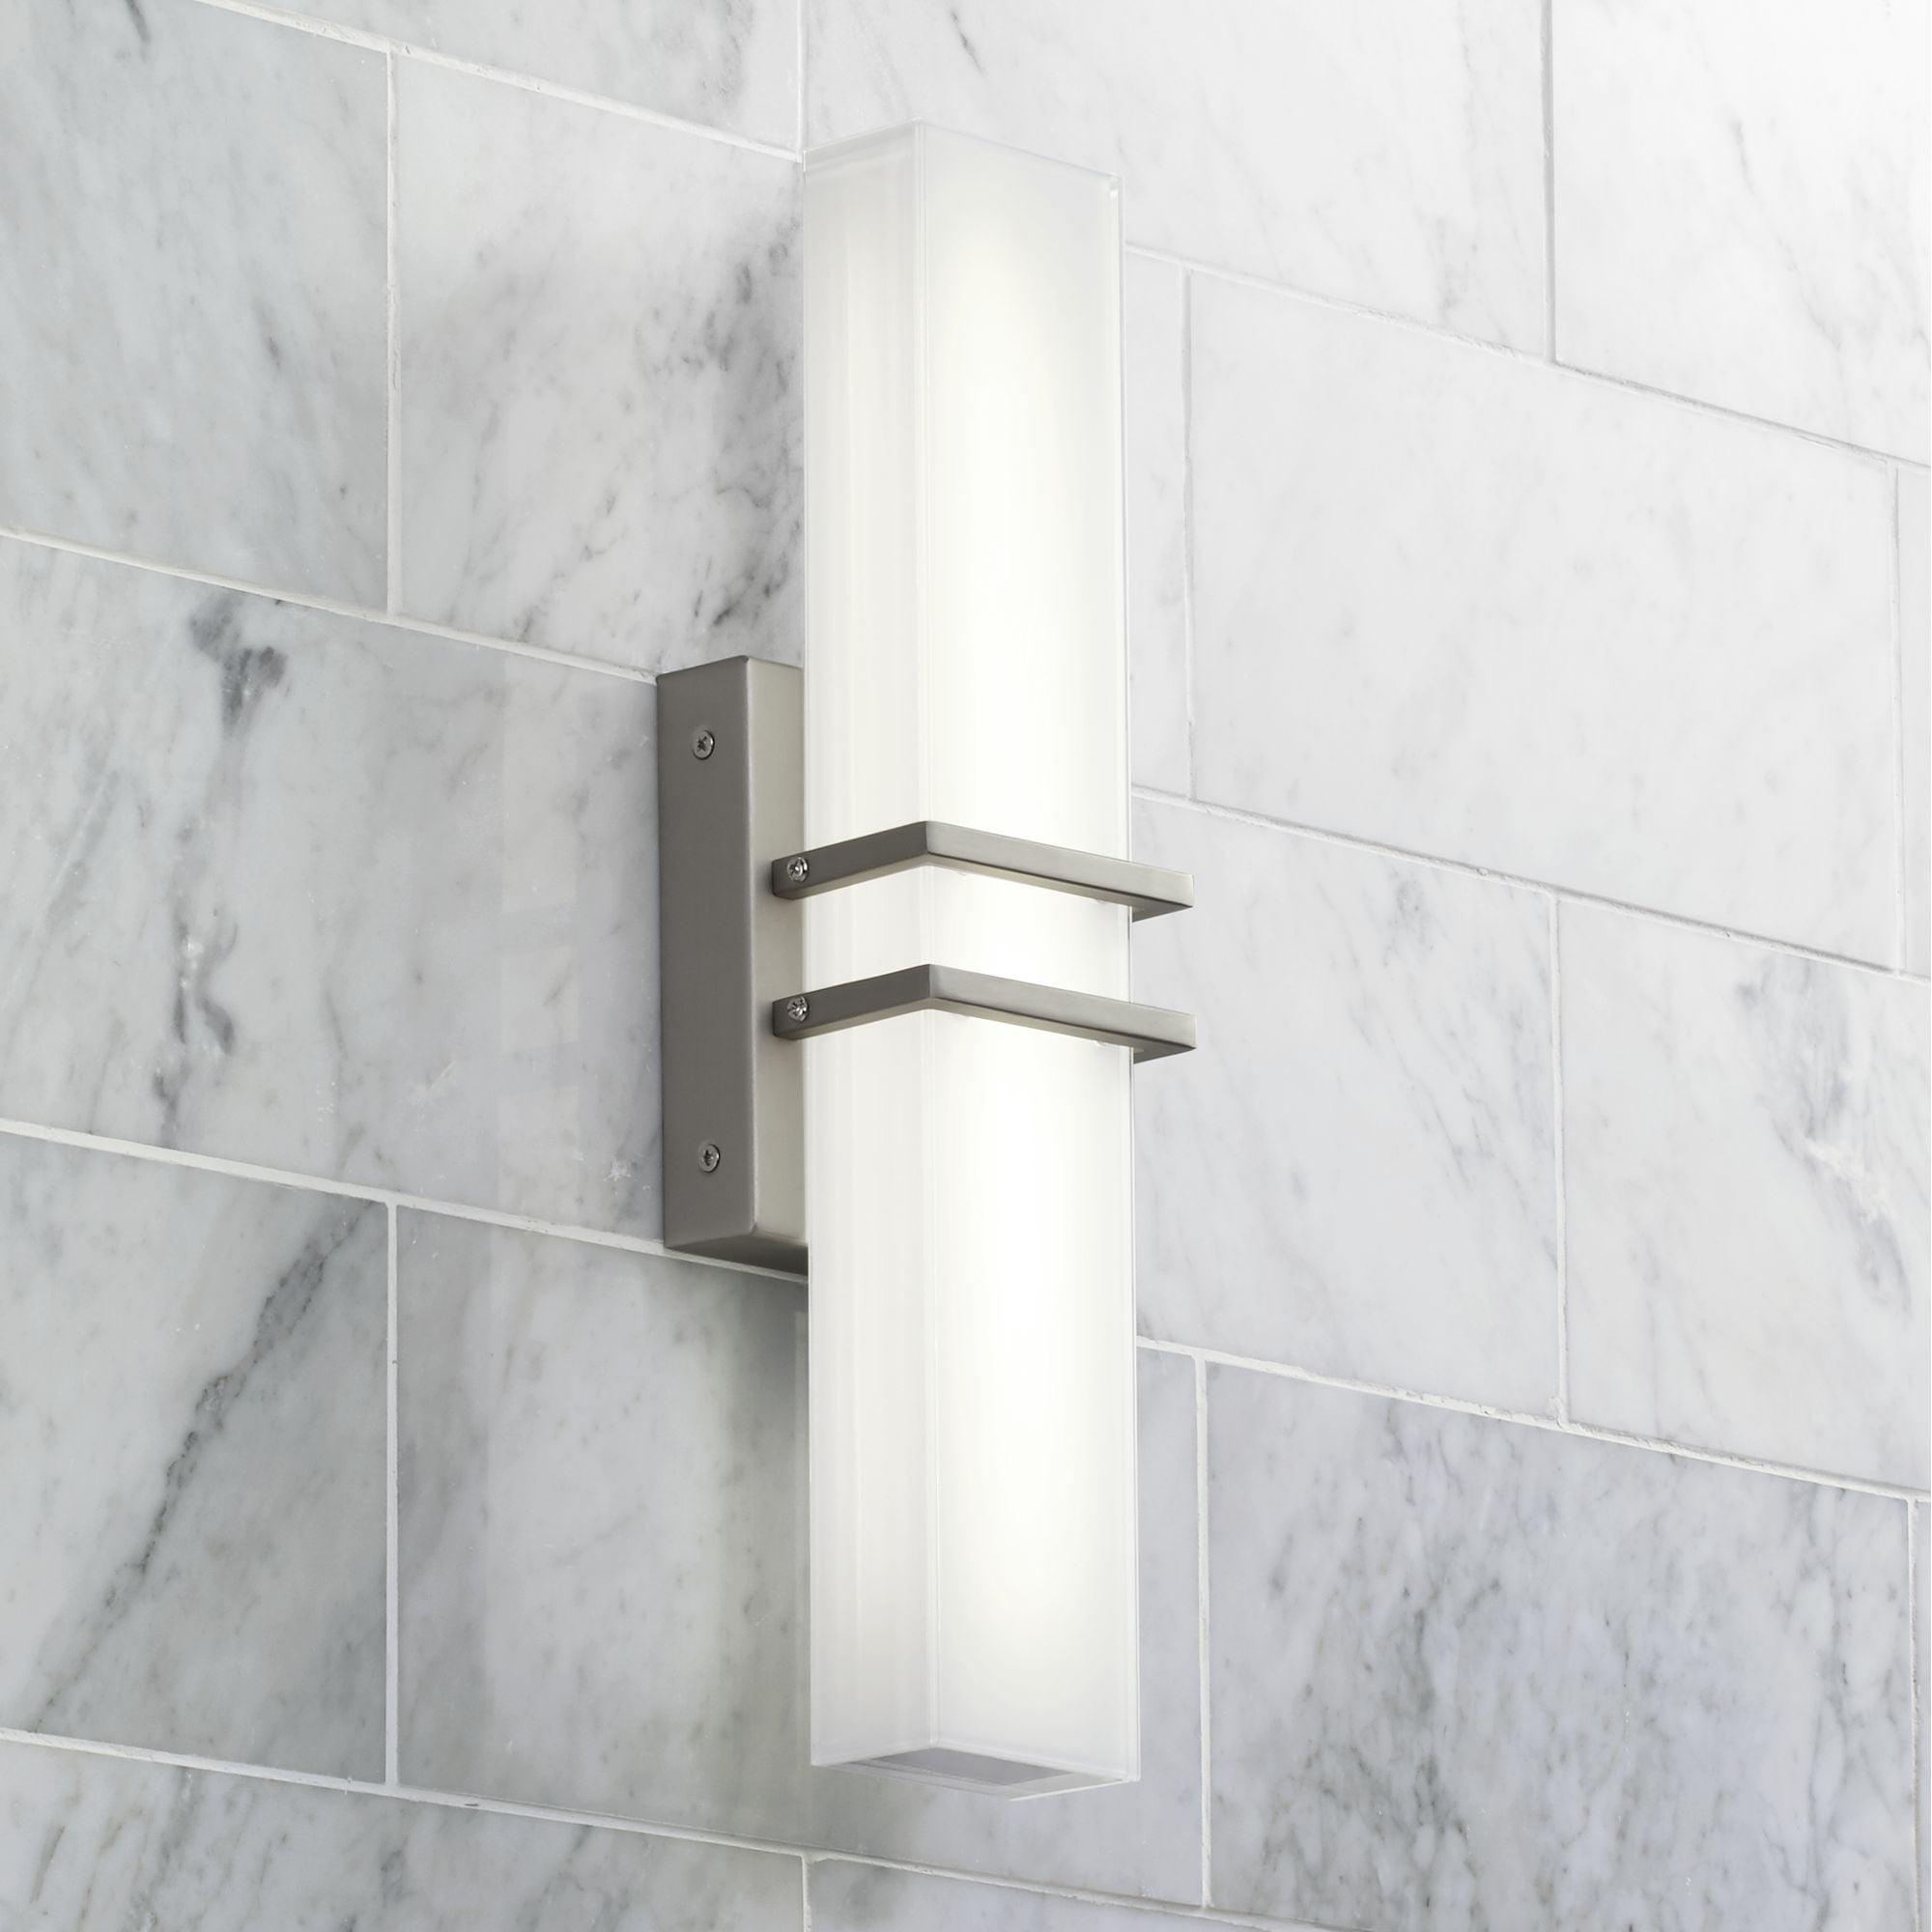 Exeter 19" Brushed Nickel LED Bathroom Wall Light with Silk-Screen Glass